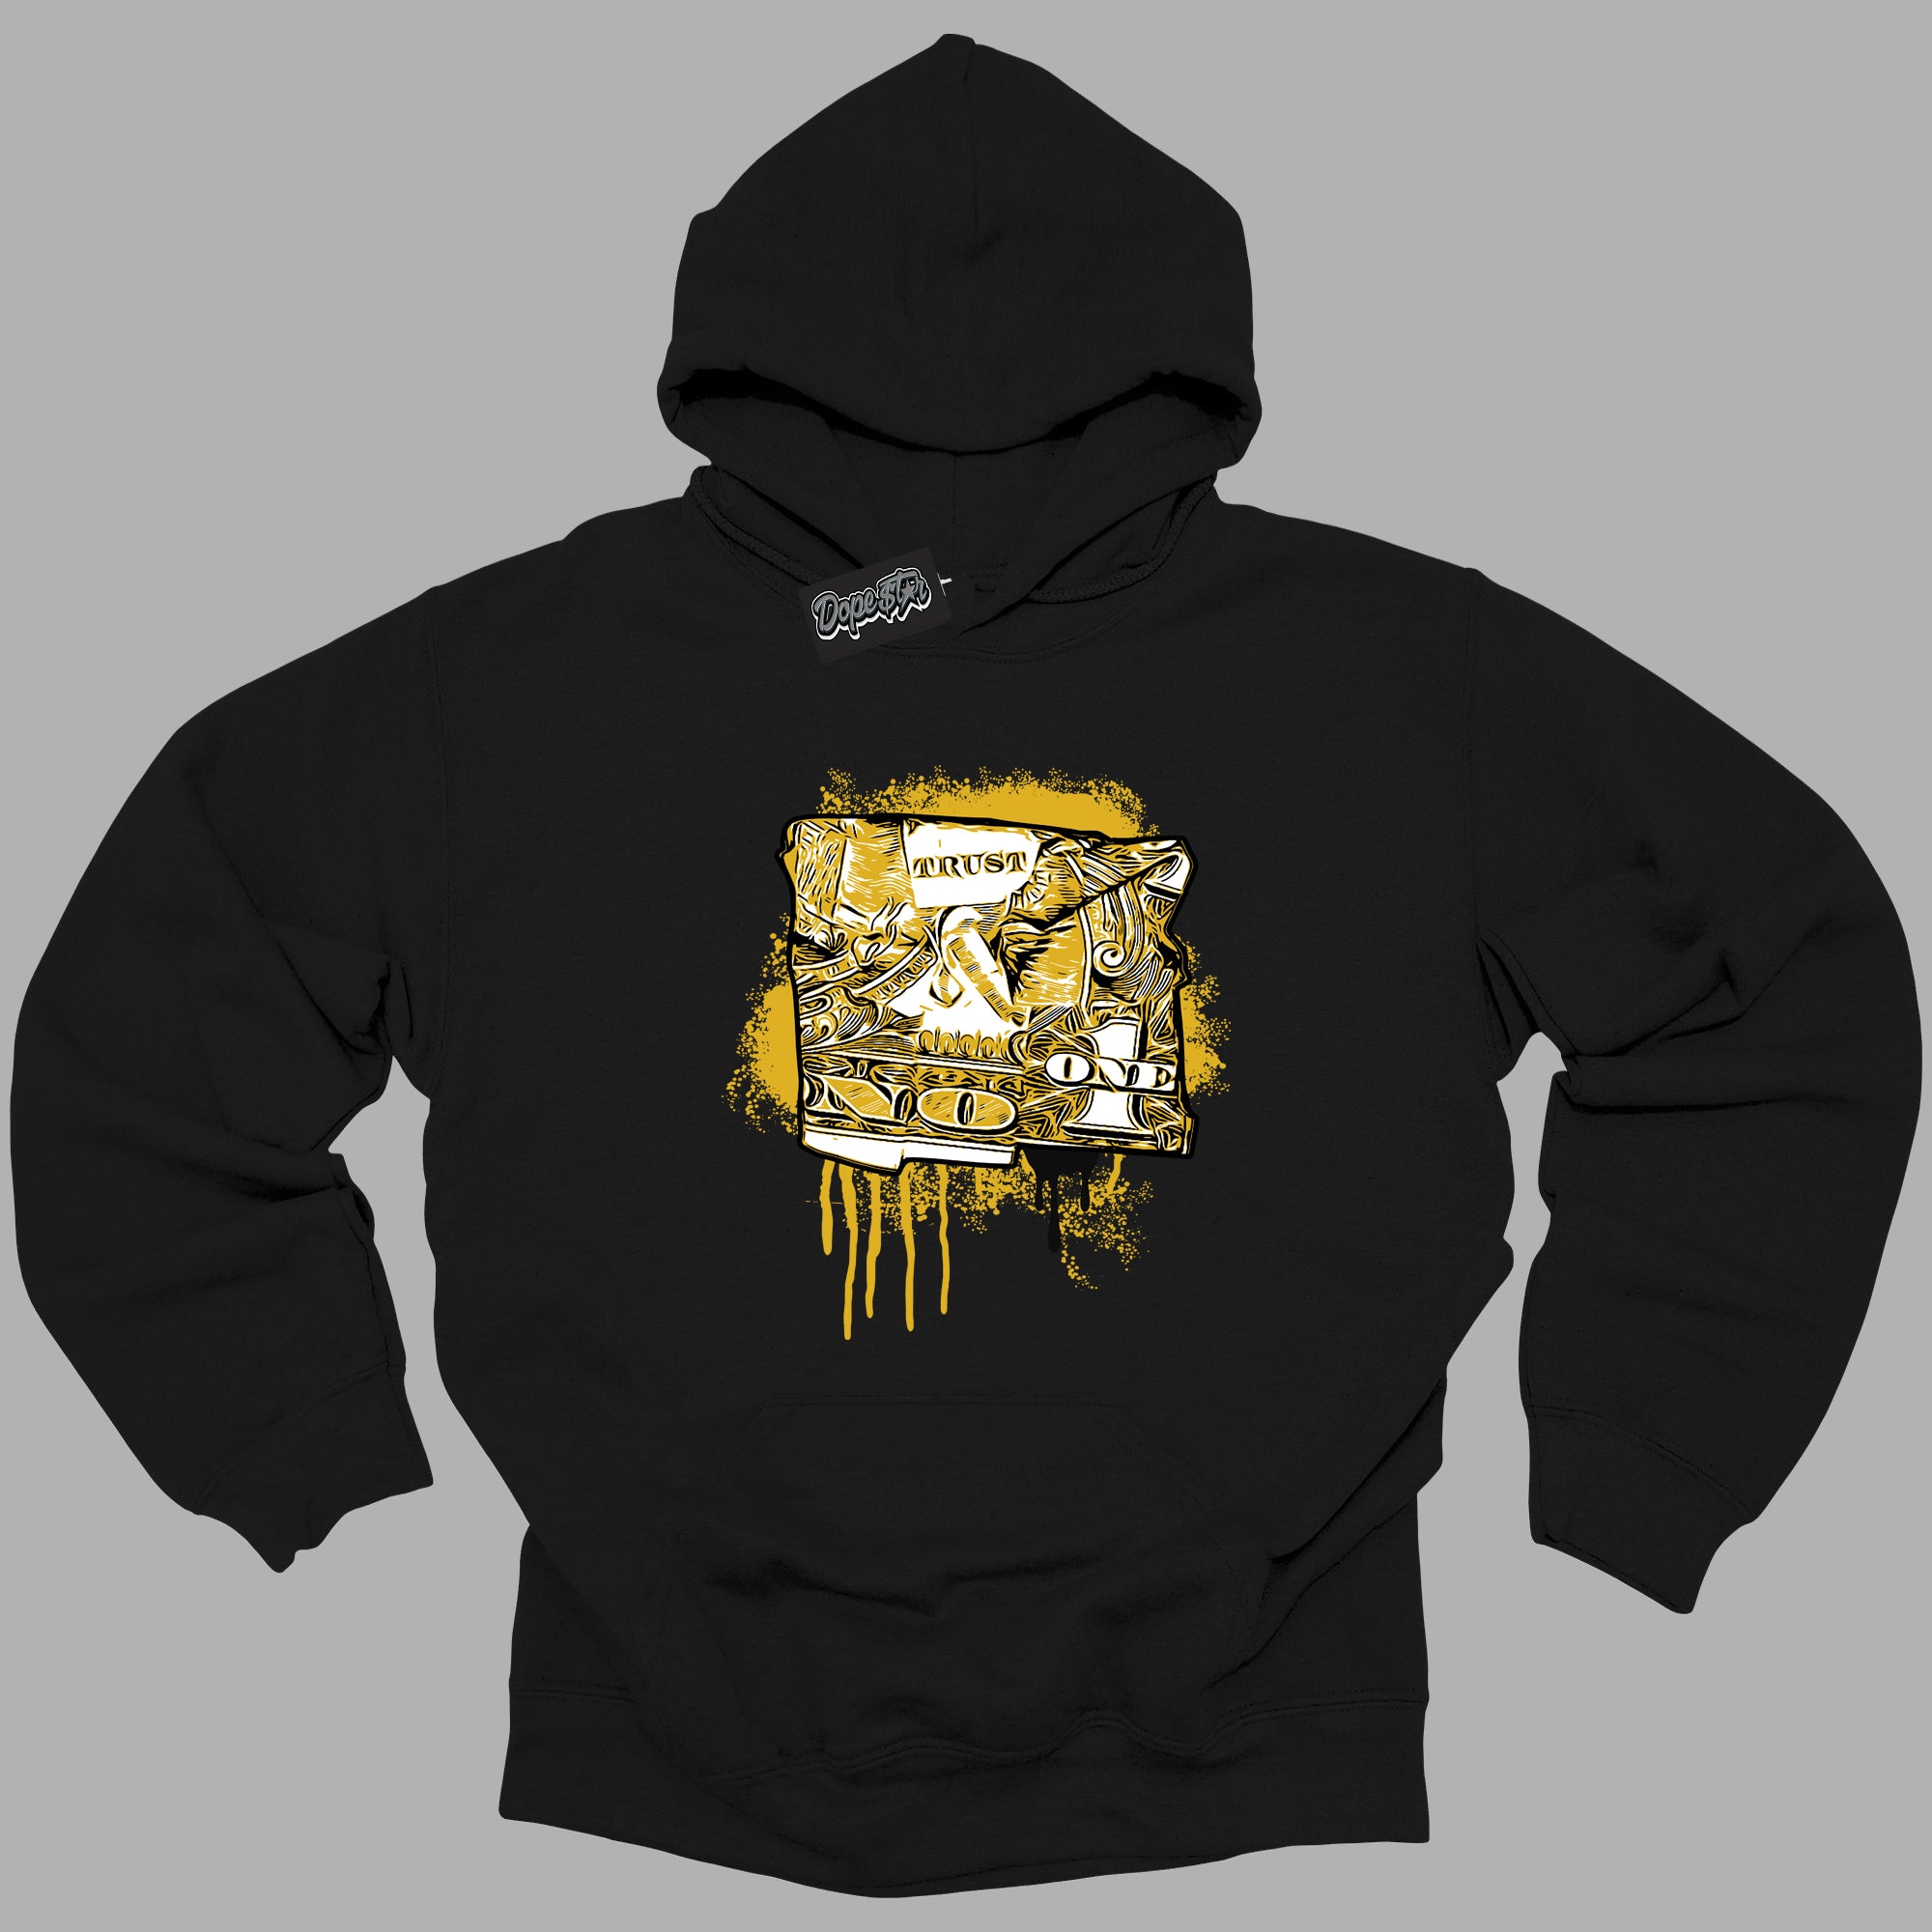 Cool Black Hoodie with “Trust No One Dollar ”  design that Perfectly Matches Yellow Ochre 6s Sneakers.